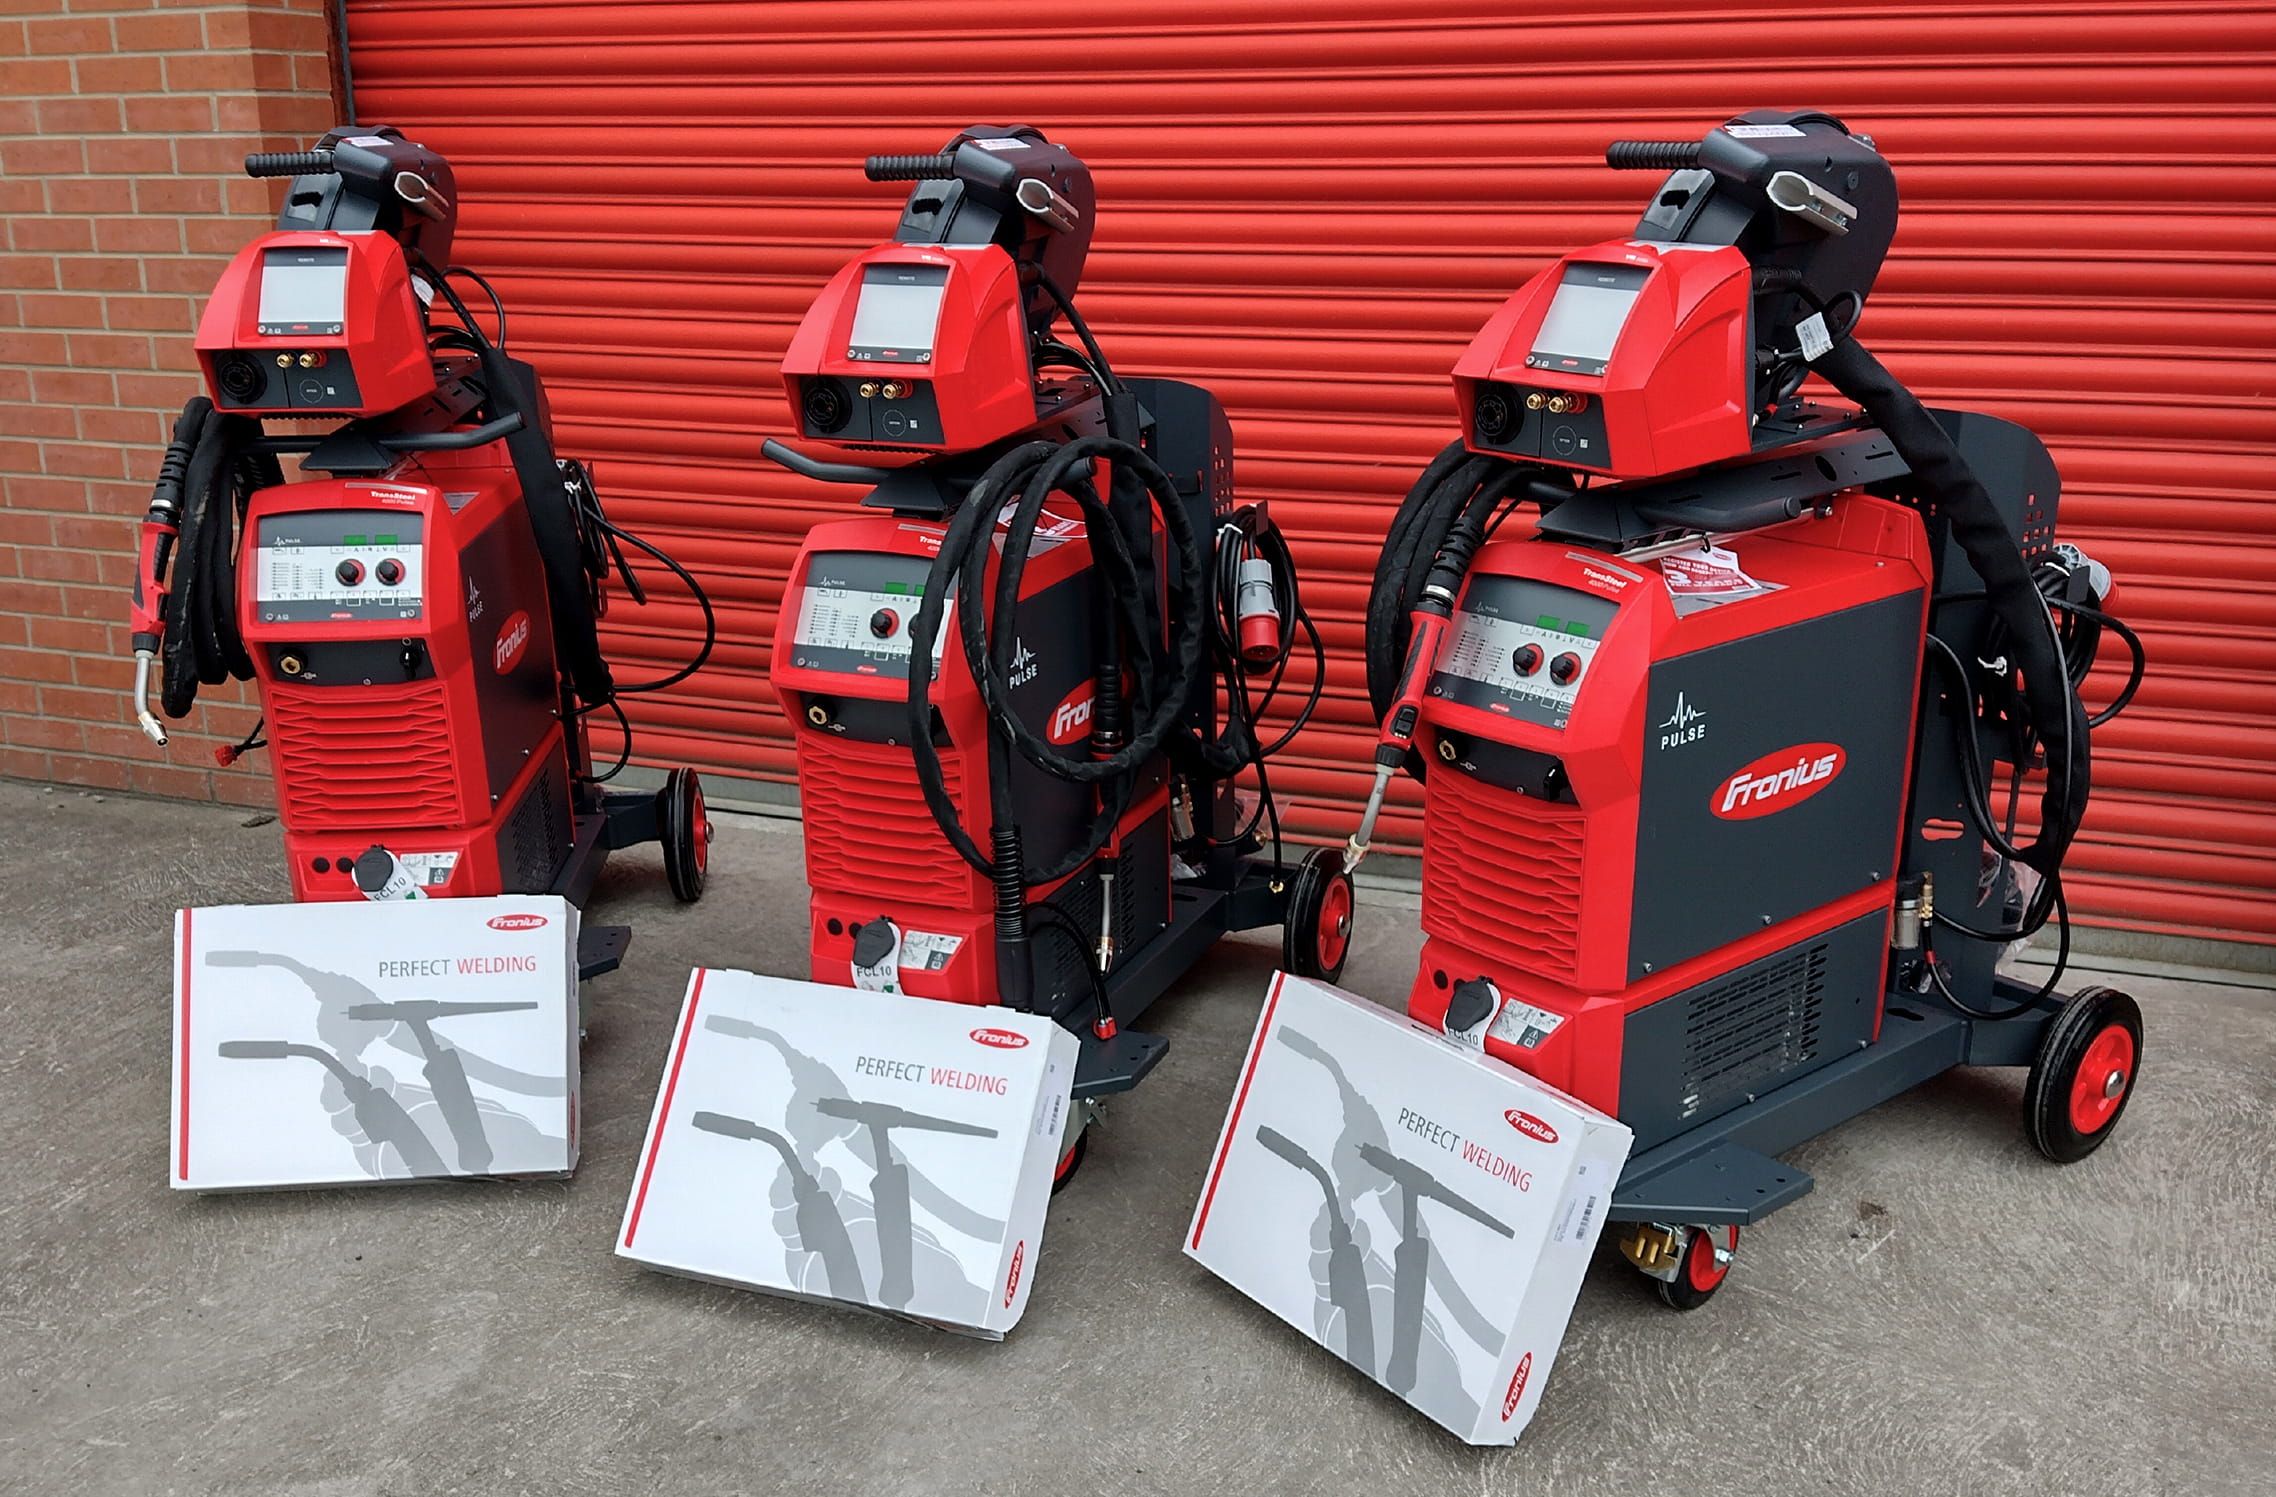 Three watercooled Fronius Transsteel 4000c Pulse machines set up outside a red shutter and awaiting delivery